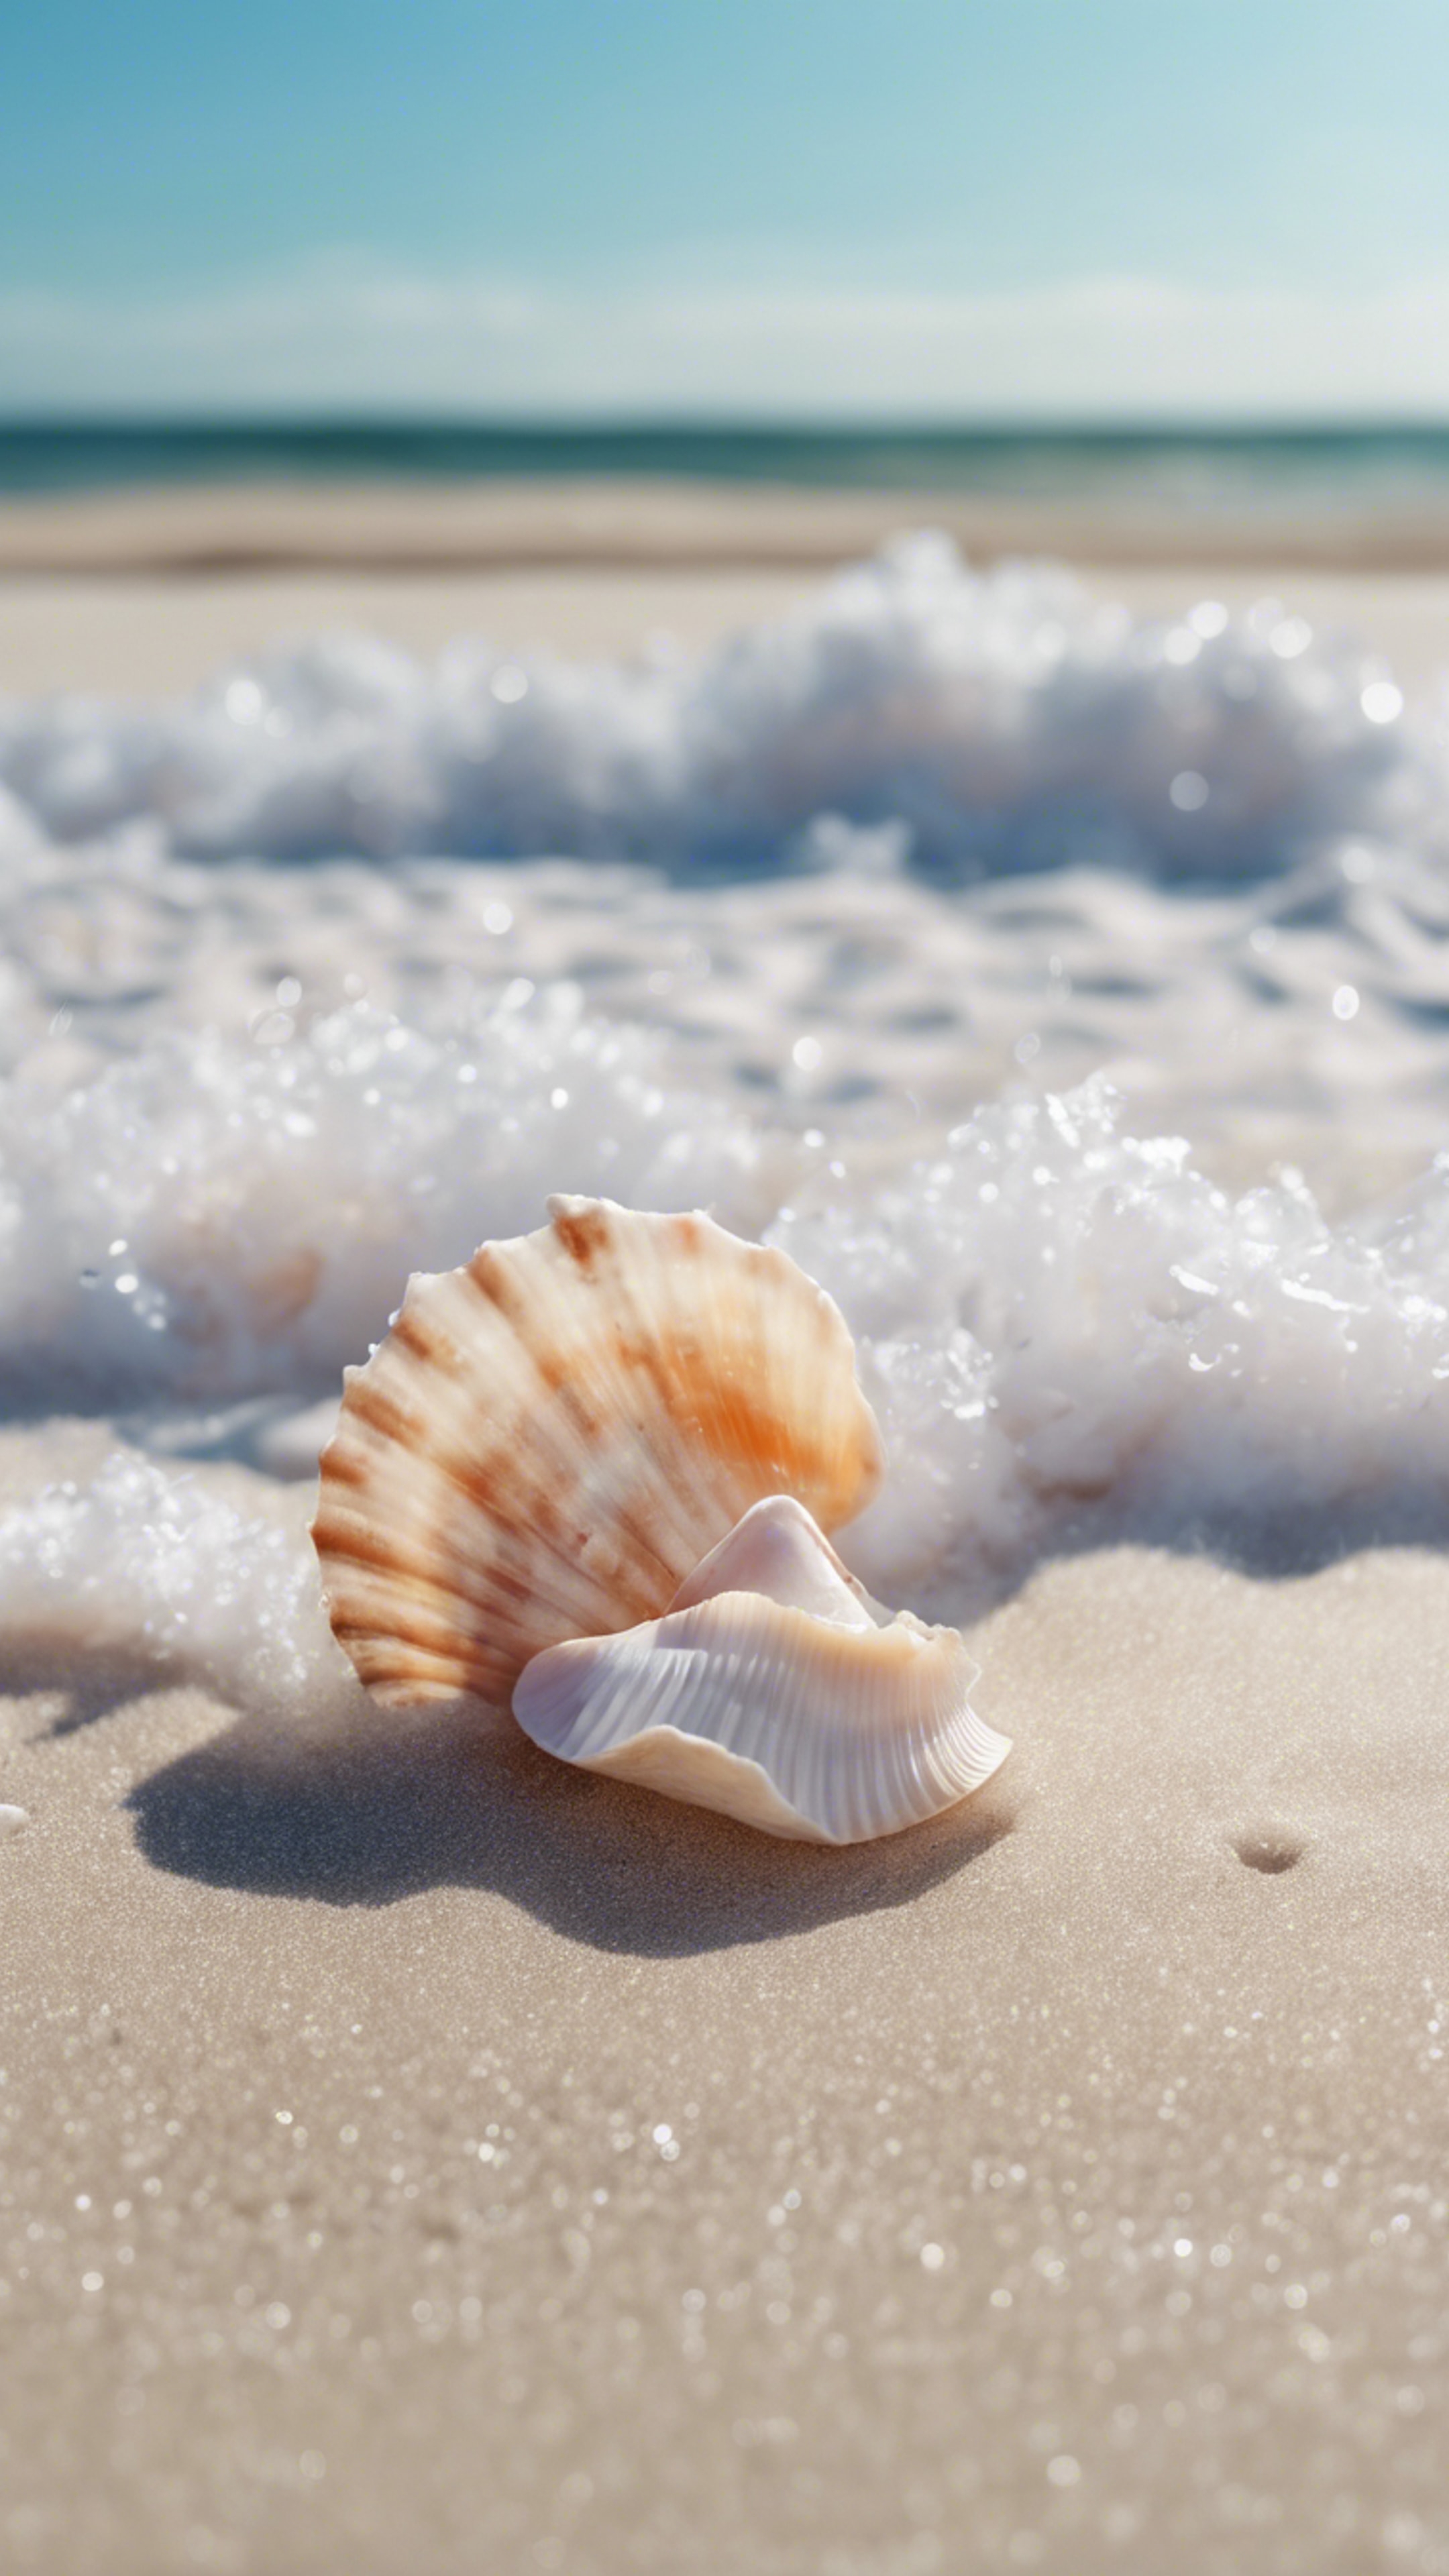 A wave washing ashore under a pastel blue sky, seashells scattered in white sand. ورق الجدران[00bc1dd8280e4c80977e]